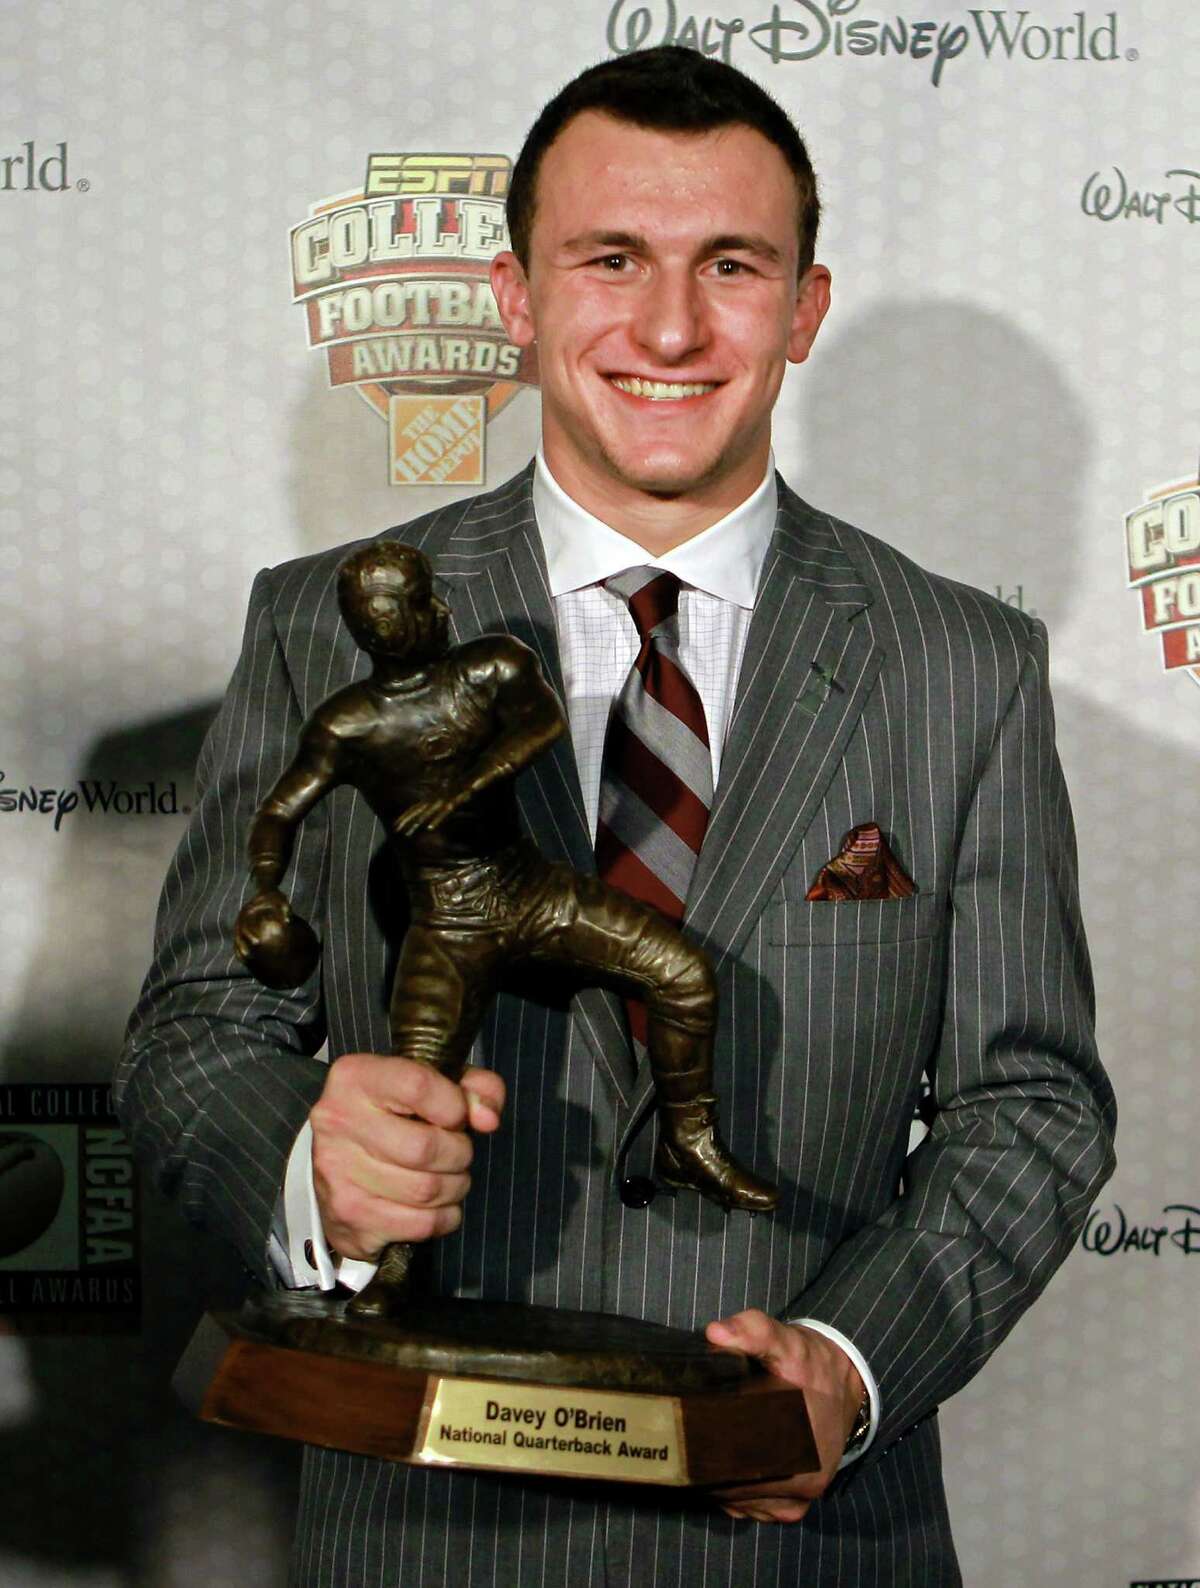 Texas A&M quarterback Johnny Manziel displays his trophy for the Davey O'Brien Award after being named the nation's best quarterback at the Home Depot College Football Awards in Lake Buena Vista, Fla., Thursday, Dec. 6, 2012. (AP Photo/John Raoux)